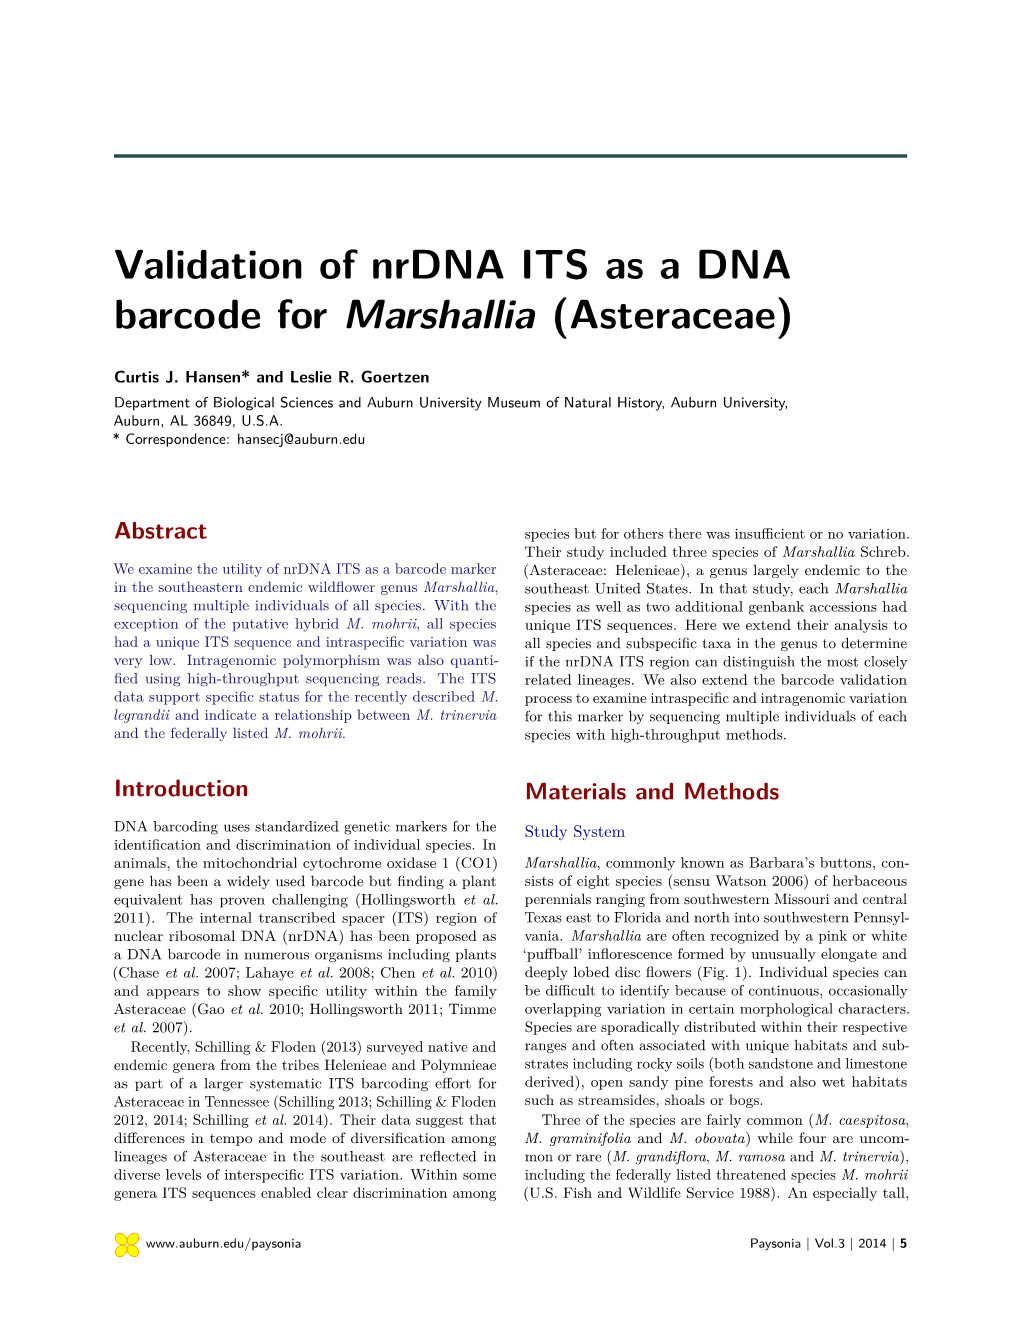 Validation of Nrdna ITS As a DNA Barcode for Marshallia (Asteraceae)